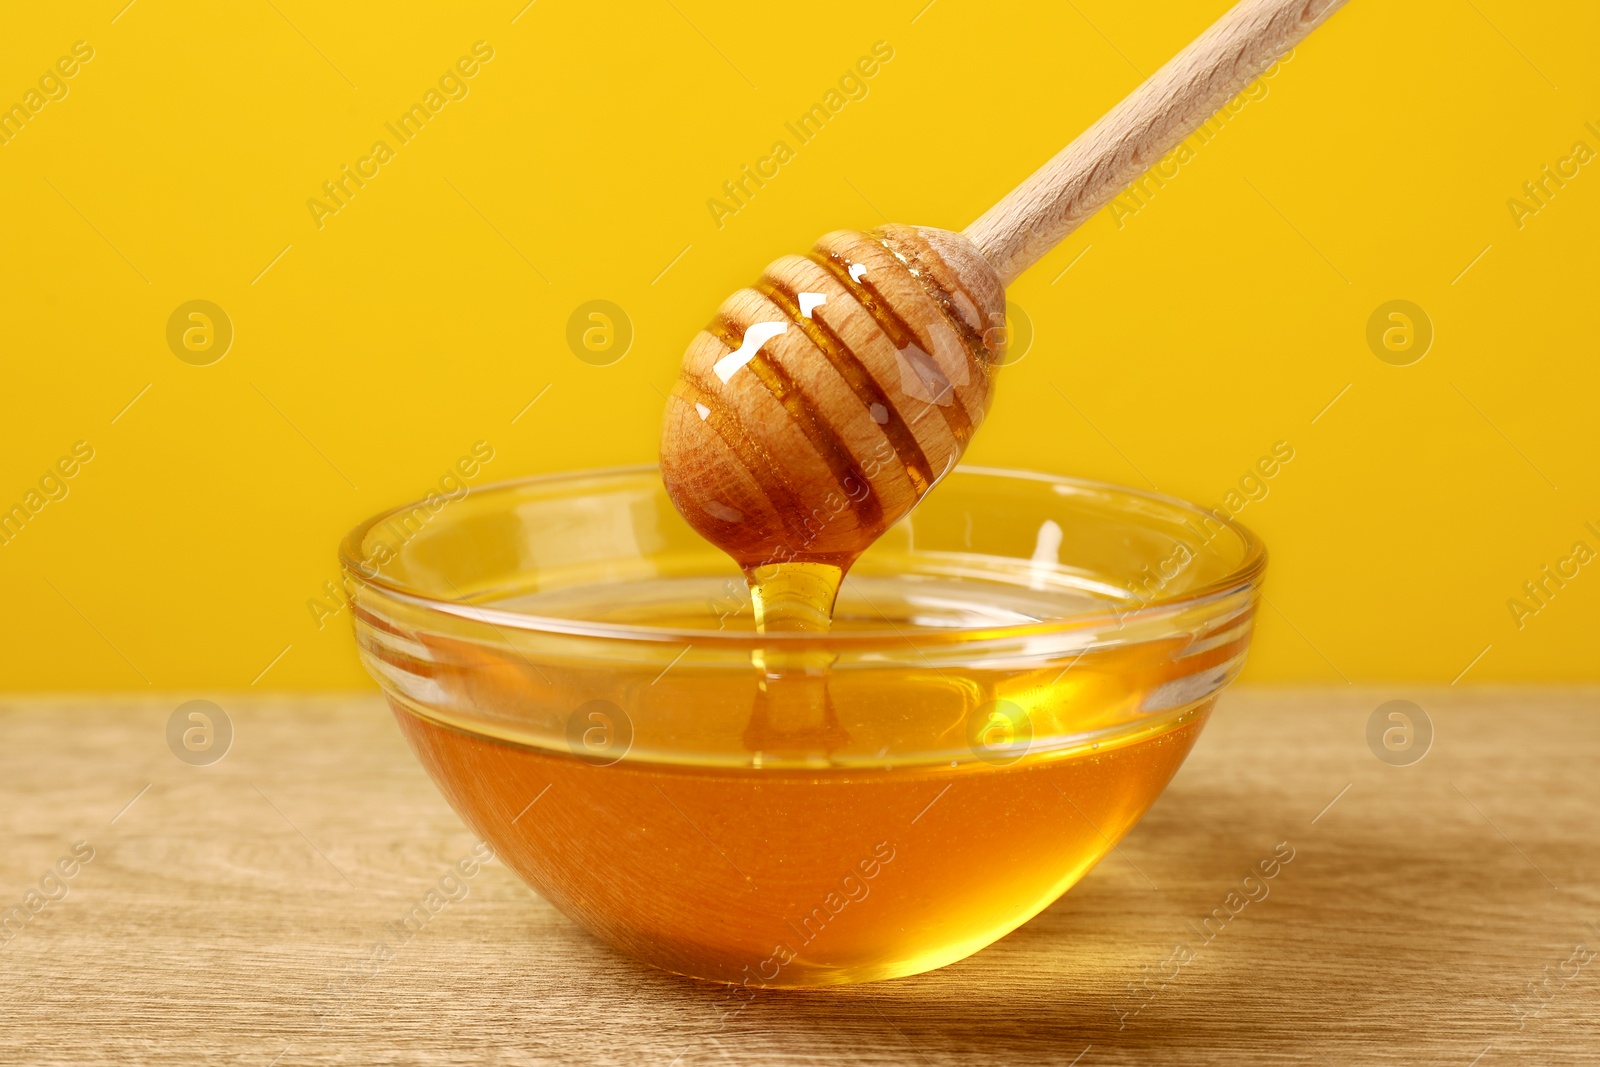 Photo of Pouring honey from dipper into glass bowl on wooden table against yellow background, closeup